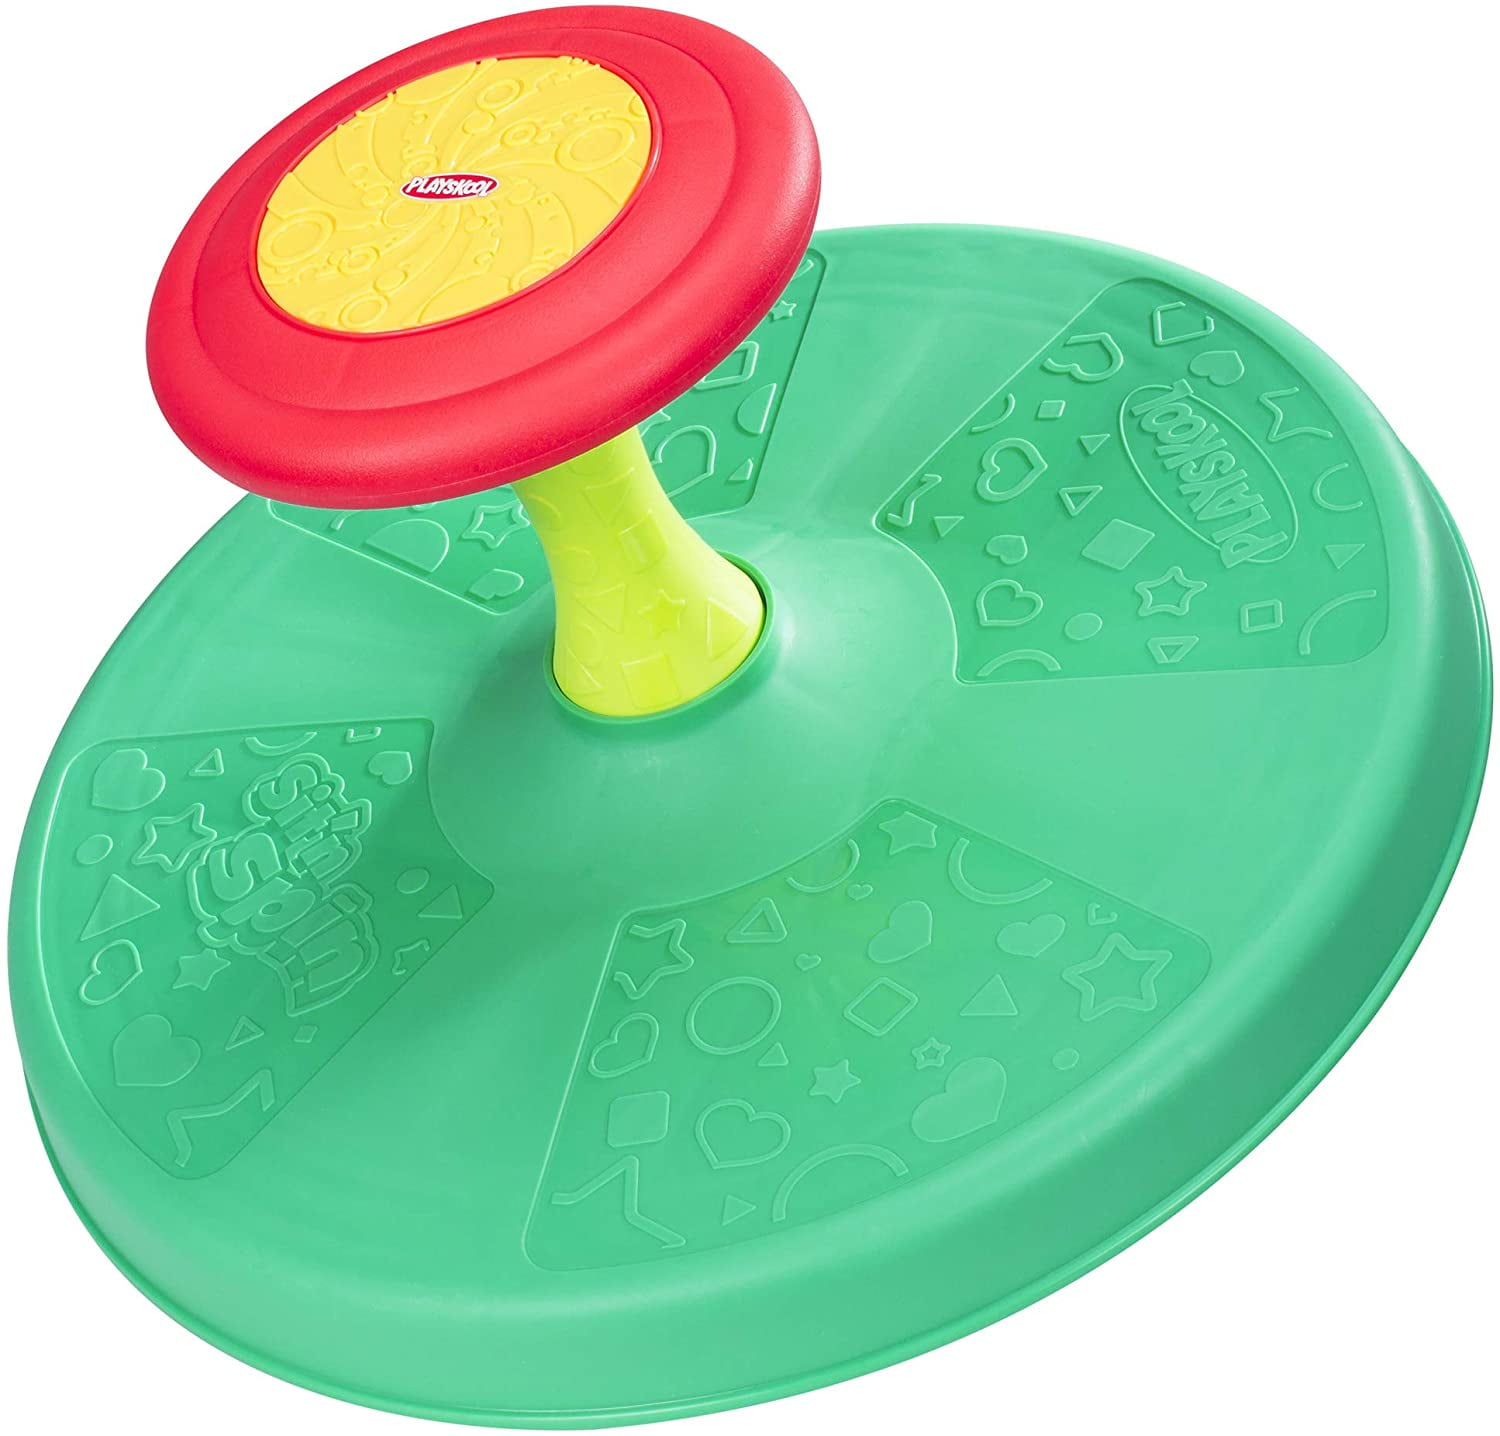 Desyatoye korolevstvo Push and Spin Sit n Spin for Toddler Riding Horseman Whirl-About 6.9x6.9x8.1-inch Toddlers Spinning Toys